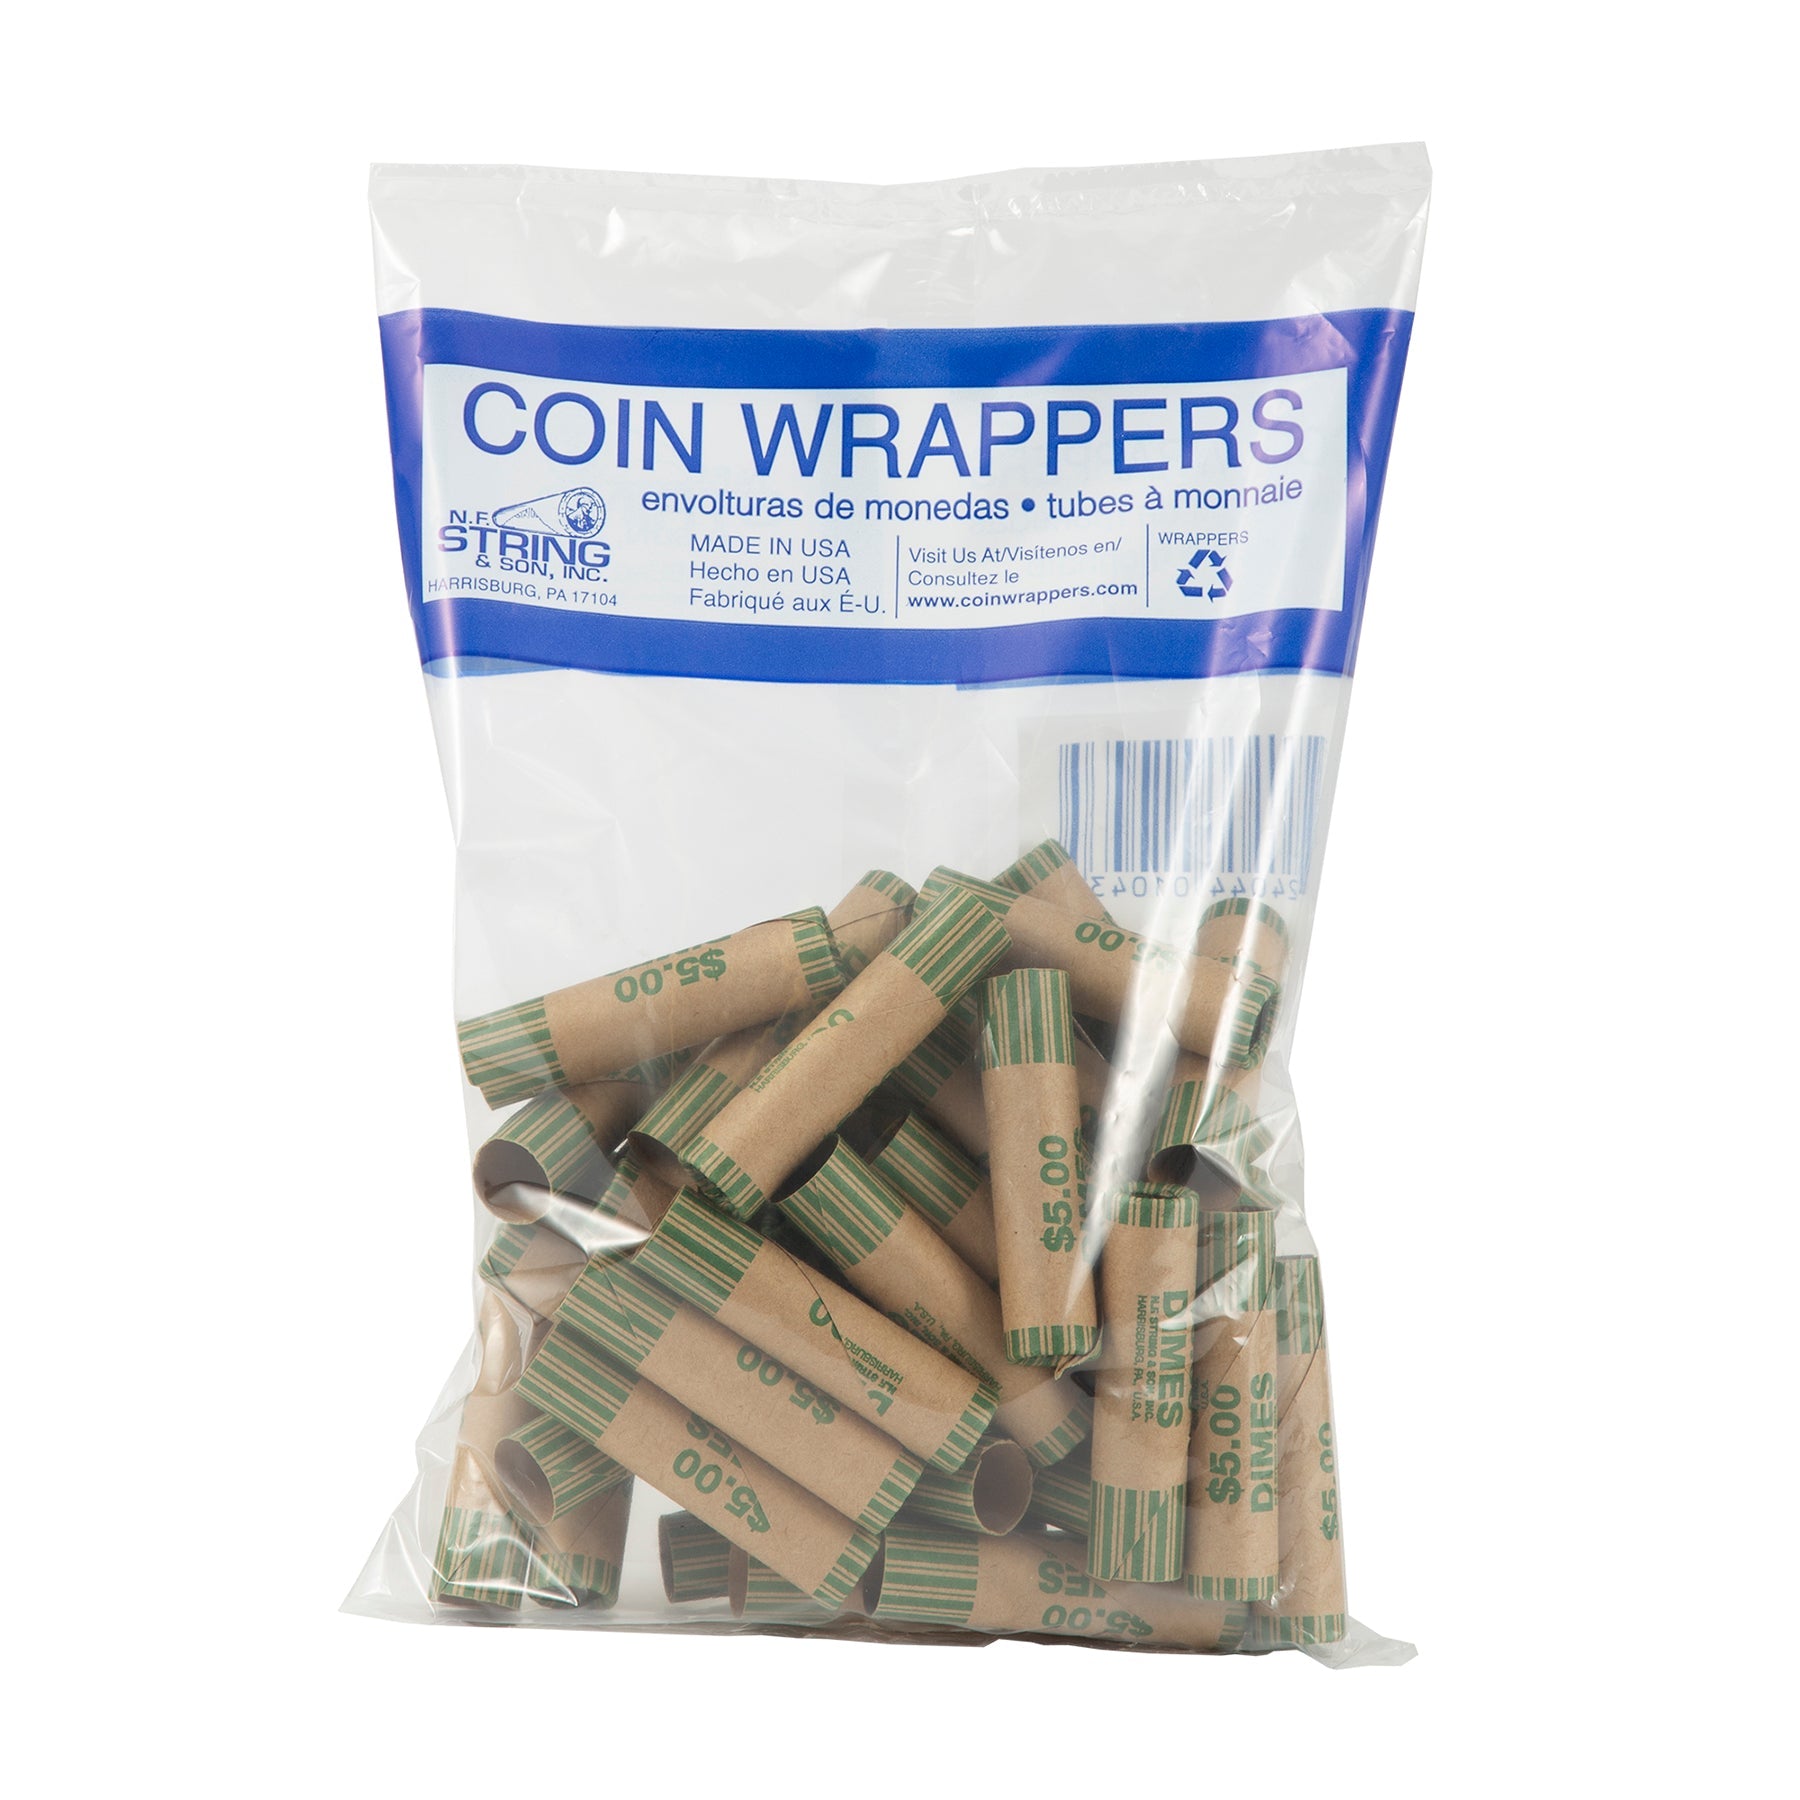 N.F. String 36 Paper Coin Wrappers $0.10